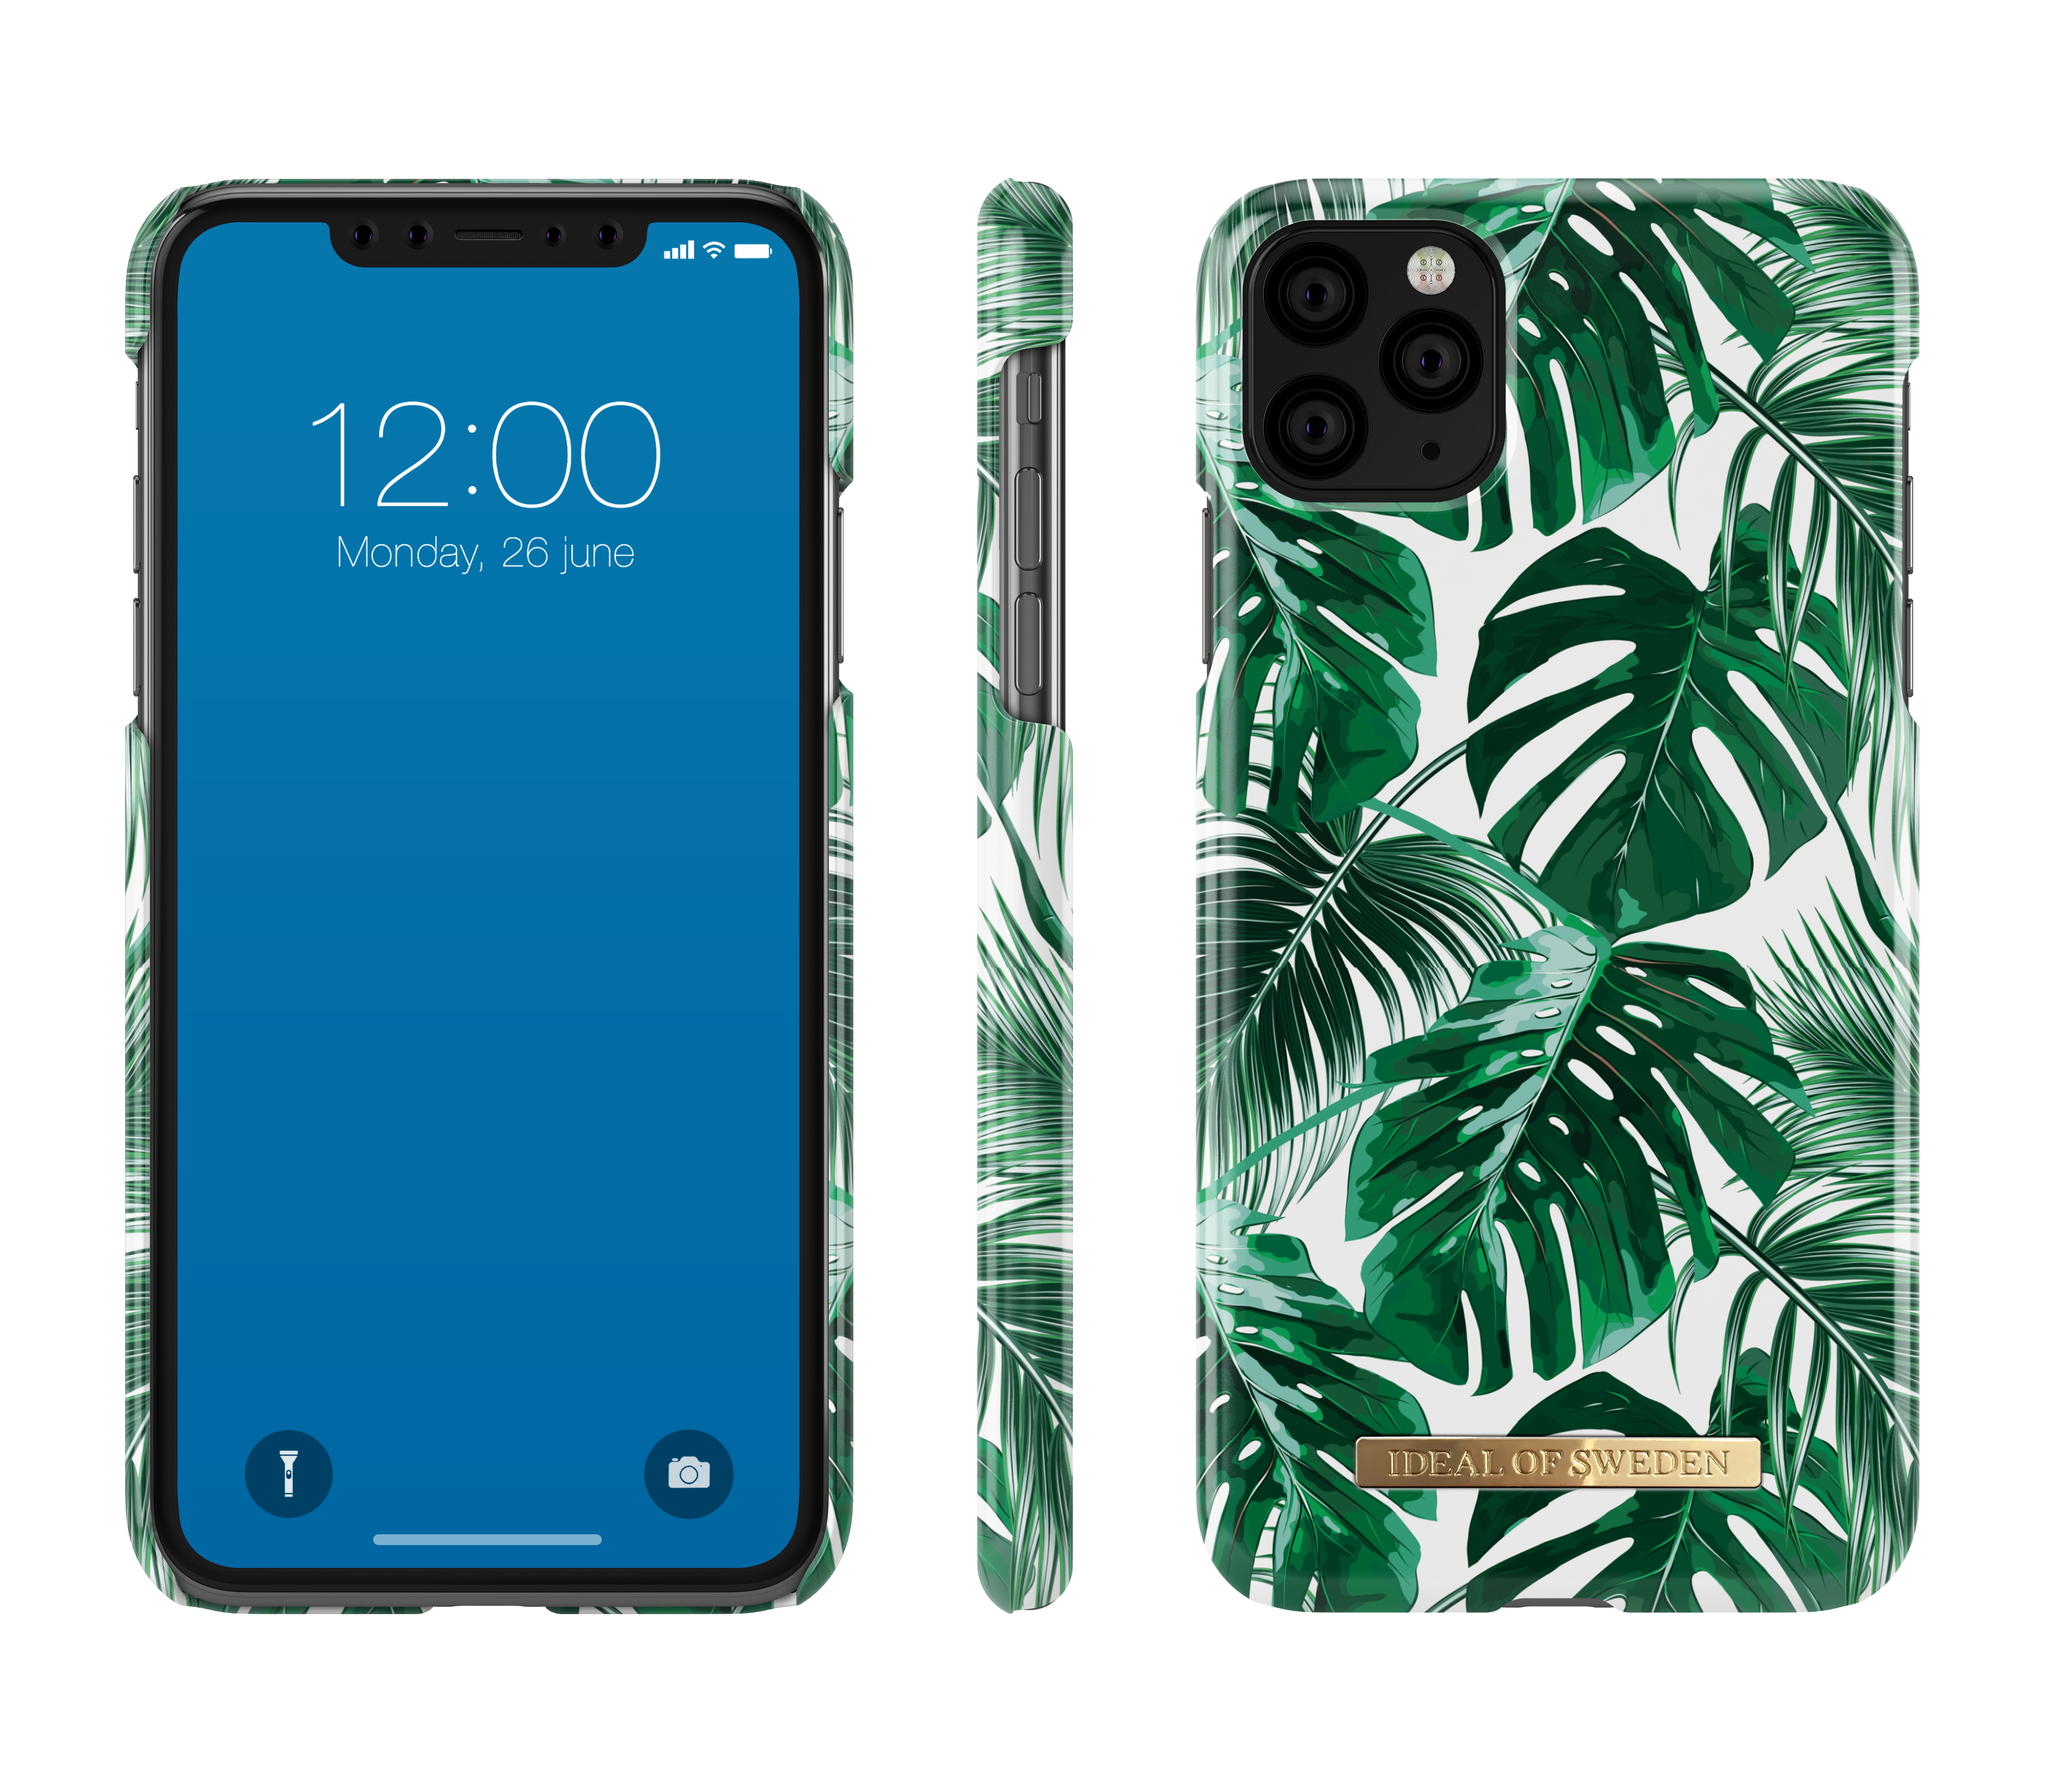 Pro OF IDFCS17-I1965-61, iPhone IDEAL Apple, SWEDEN Monstera Max, Max, Jungle 11 Backcover, iPhone XS